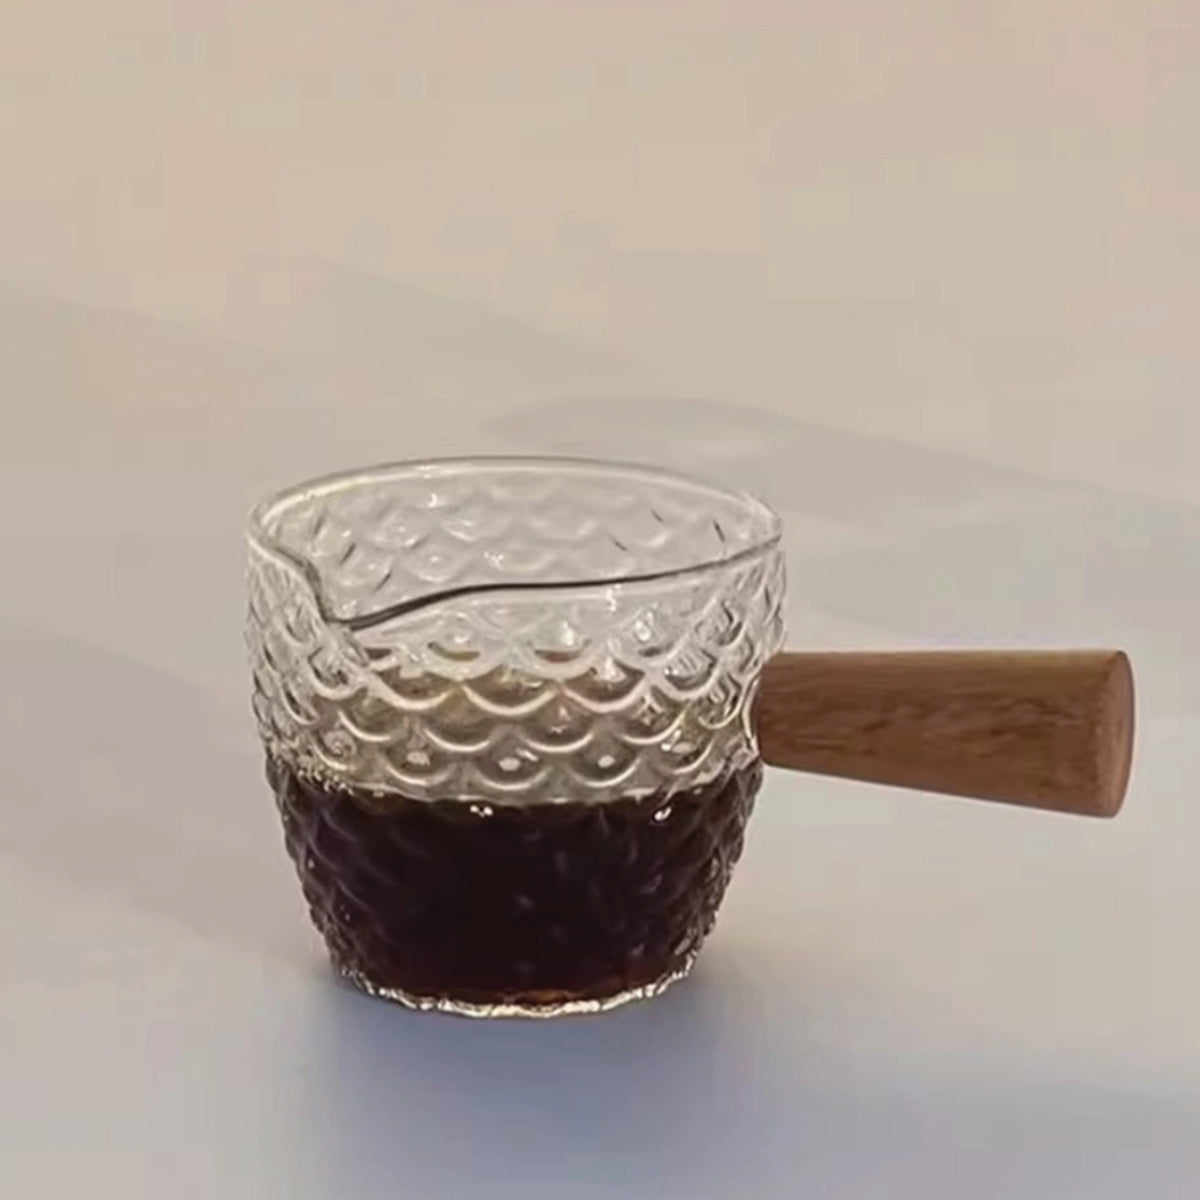 Mini Wooden Handle Glass Measuring Cup